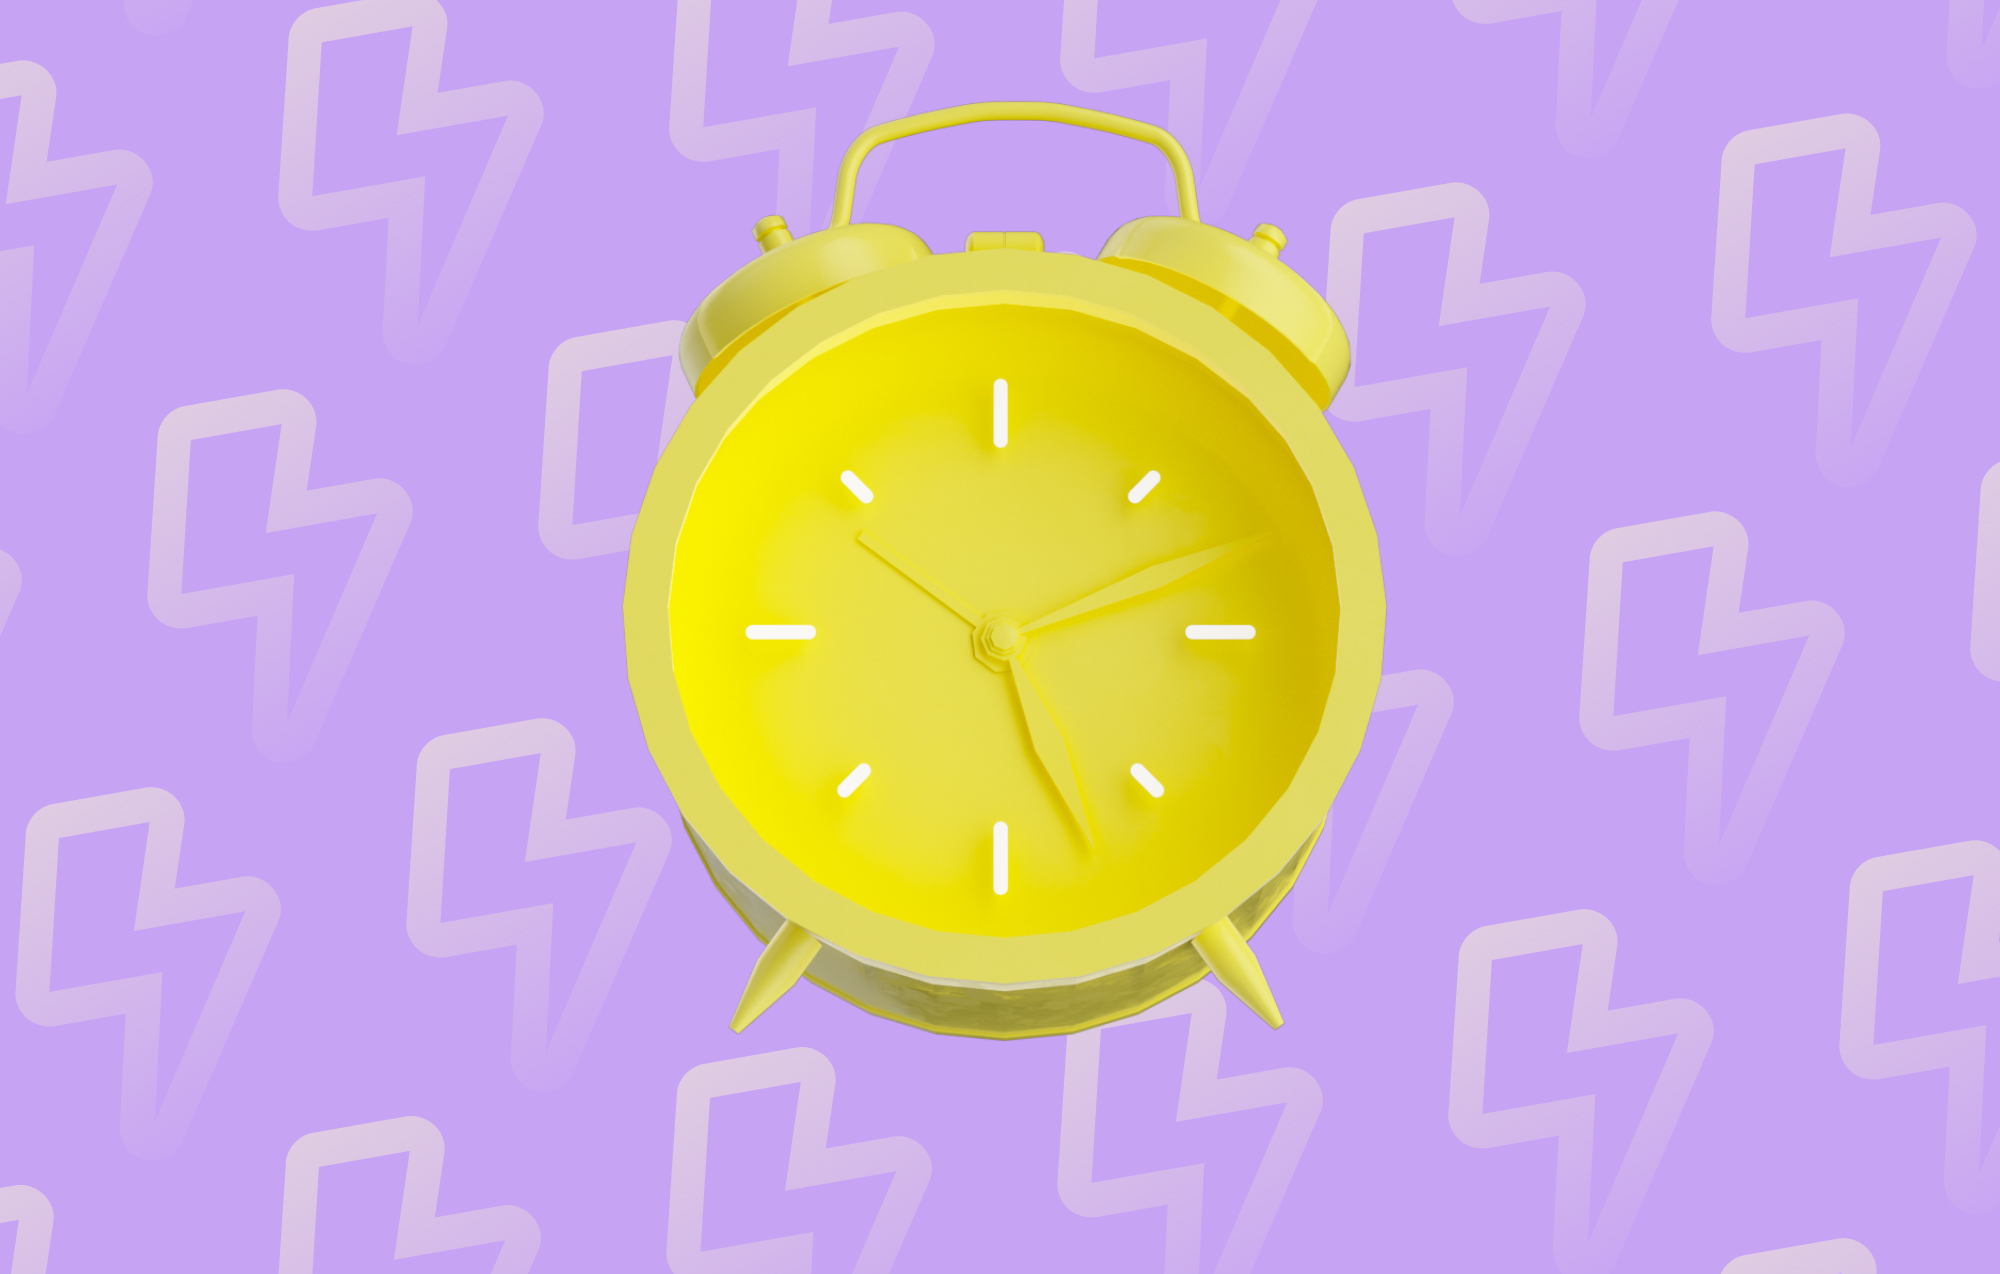 3D illustration of bright yellow alarm clock on background of lighting icons, for charles blog post about why start WhatsApp marketing now